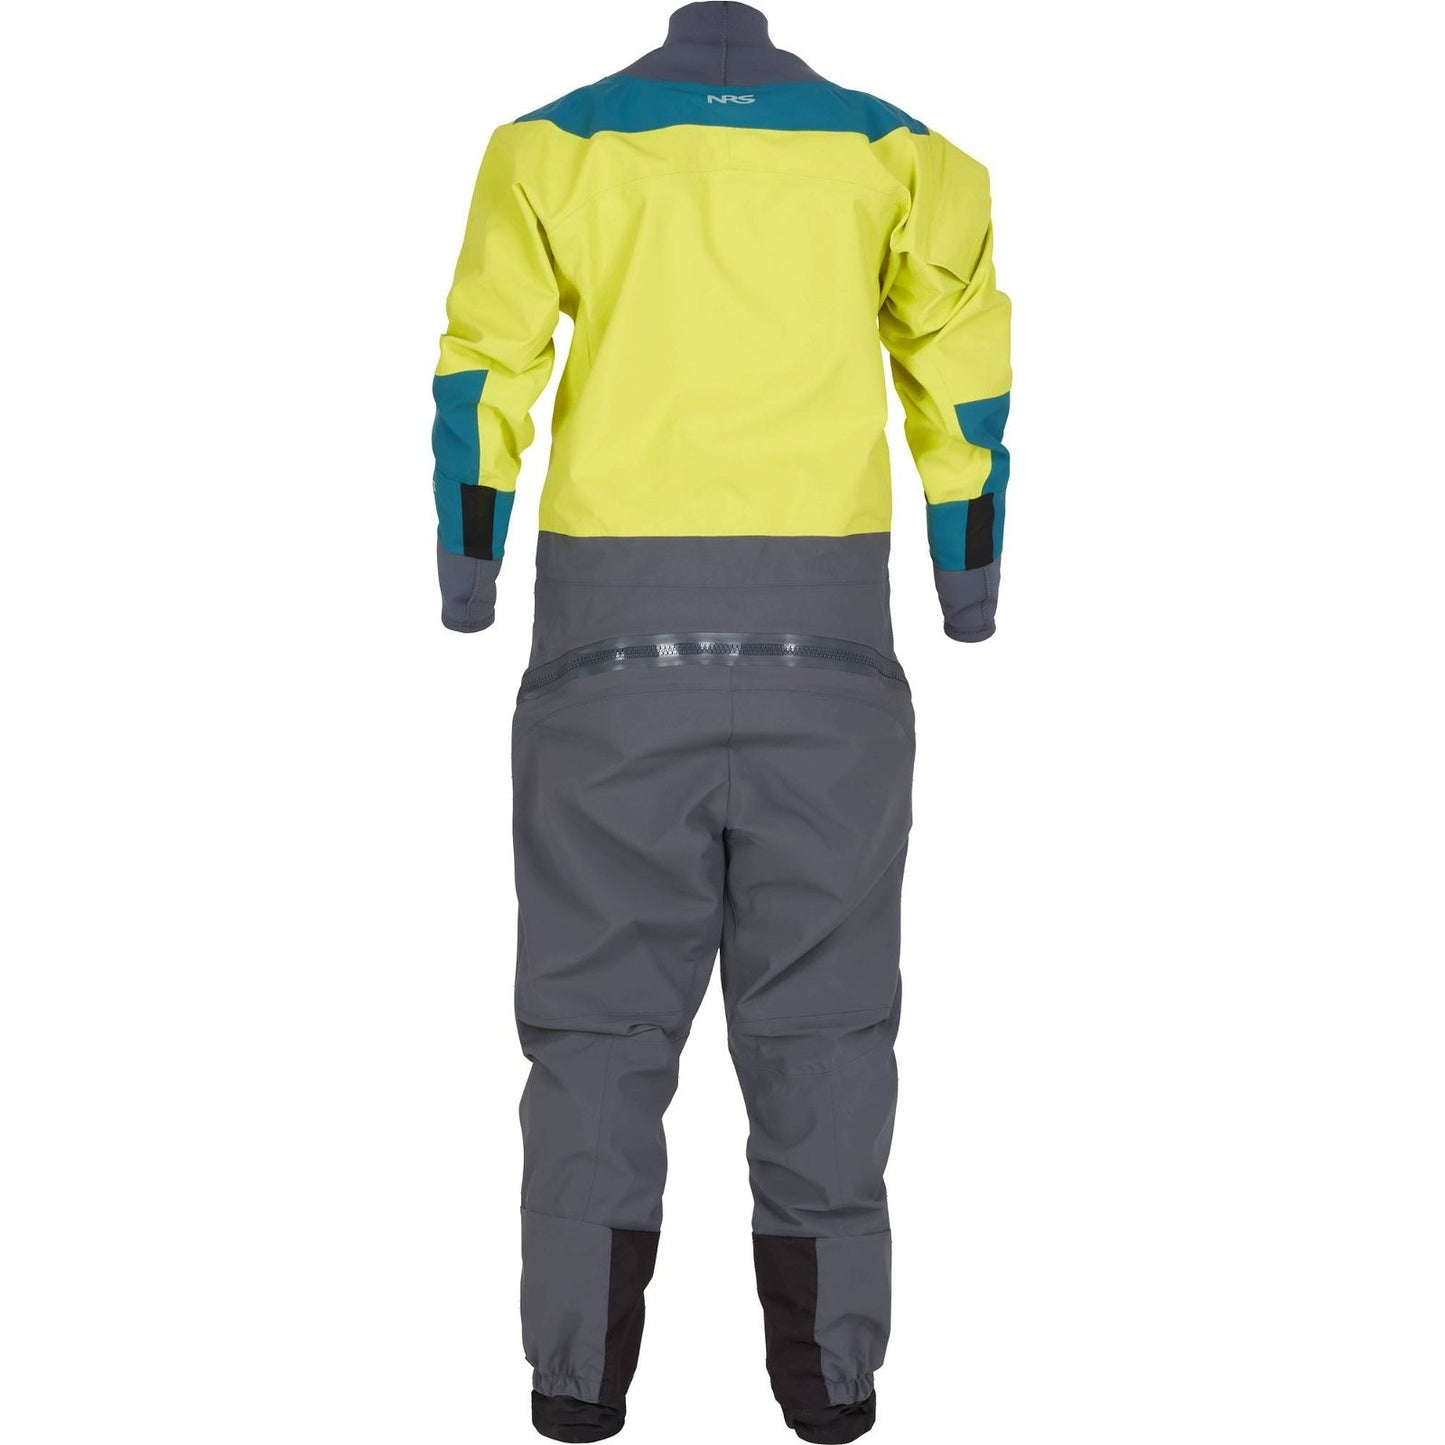   Women's Nomad GORE-TEX Pro Semi-Dry Suit  BestCoast Outfitters 